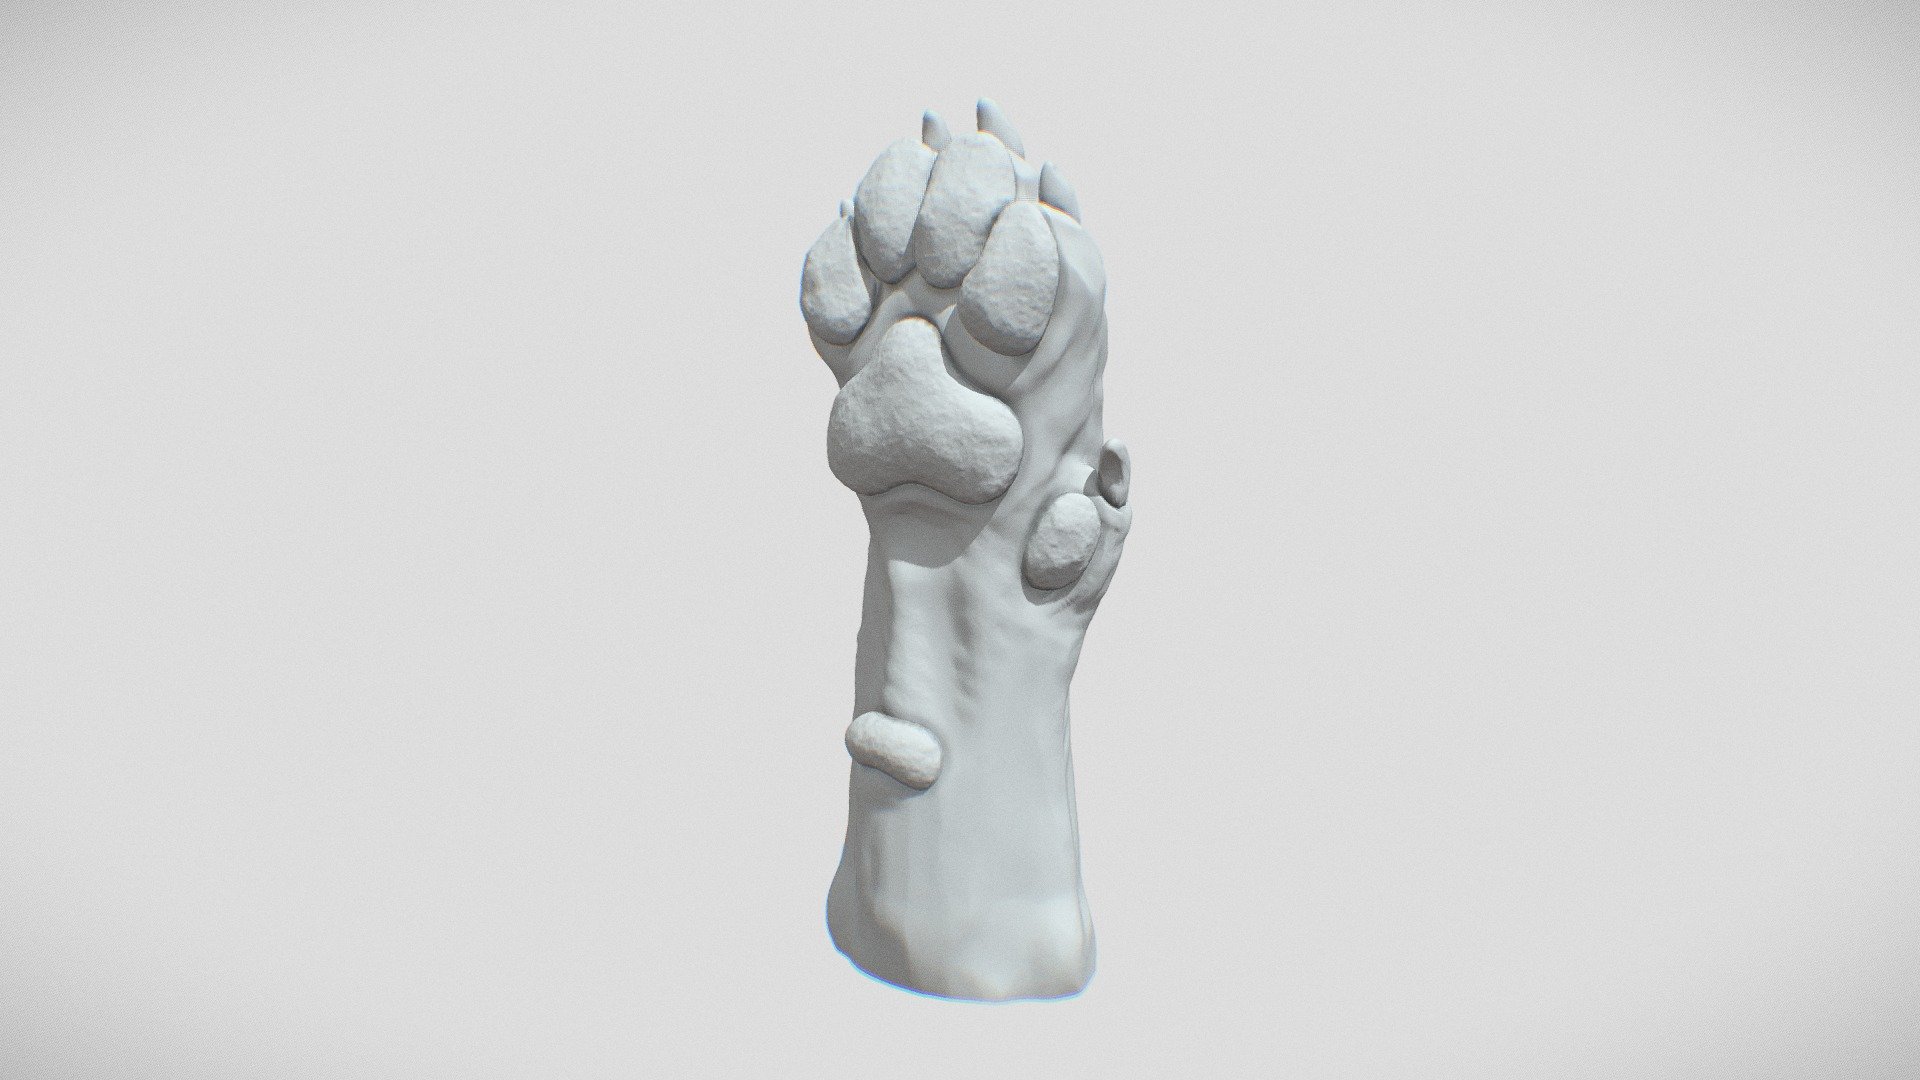 This paw was sculpted and decimated in zbrush.

see more of my work on my website and instagram:

https://www.tomjohnsonart.co.uk/

https://www.instagram.com/tomjohnsonart/ - Dog Paw - Download Free 3D model by Tom Johnson (@Brigyon) 3d model